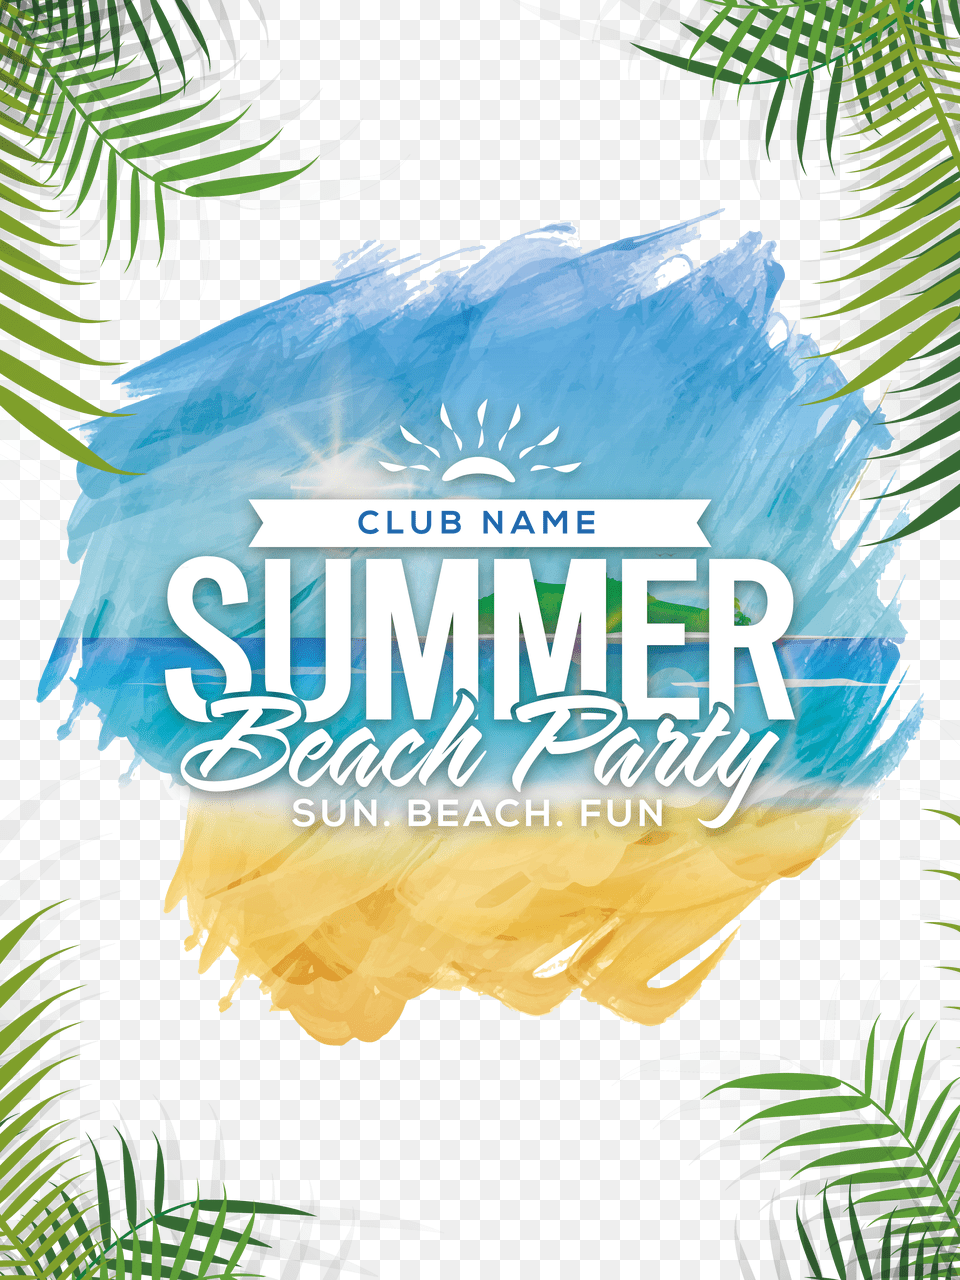 Summer Beach Party Png Image